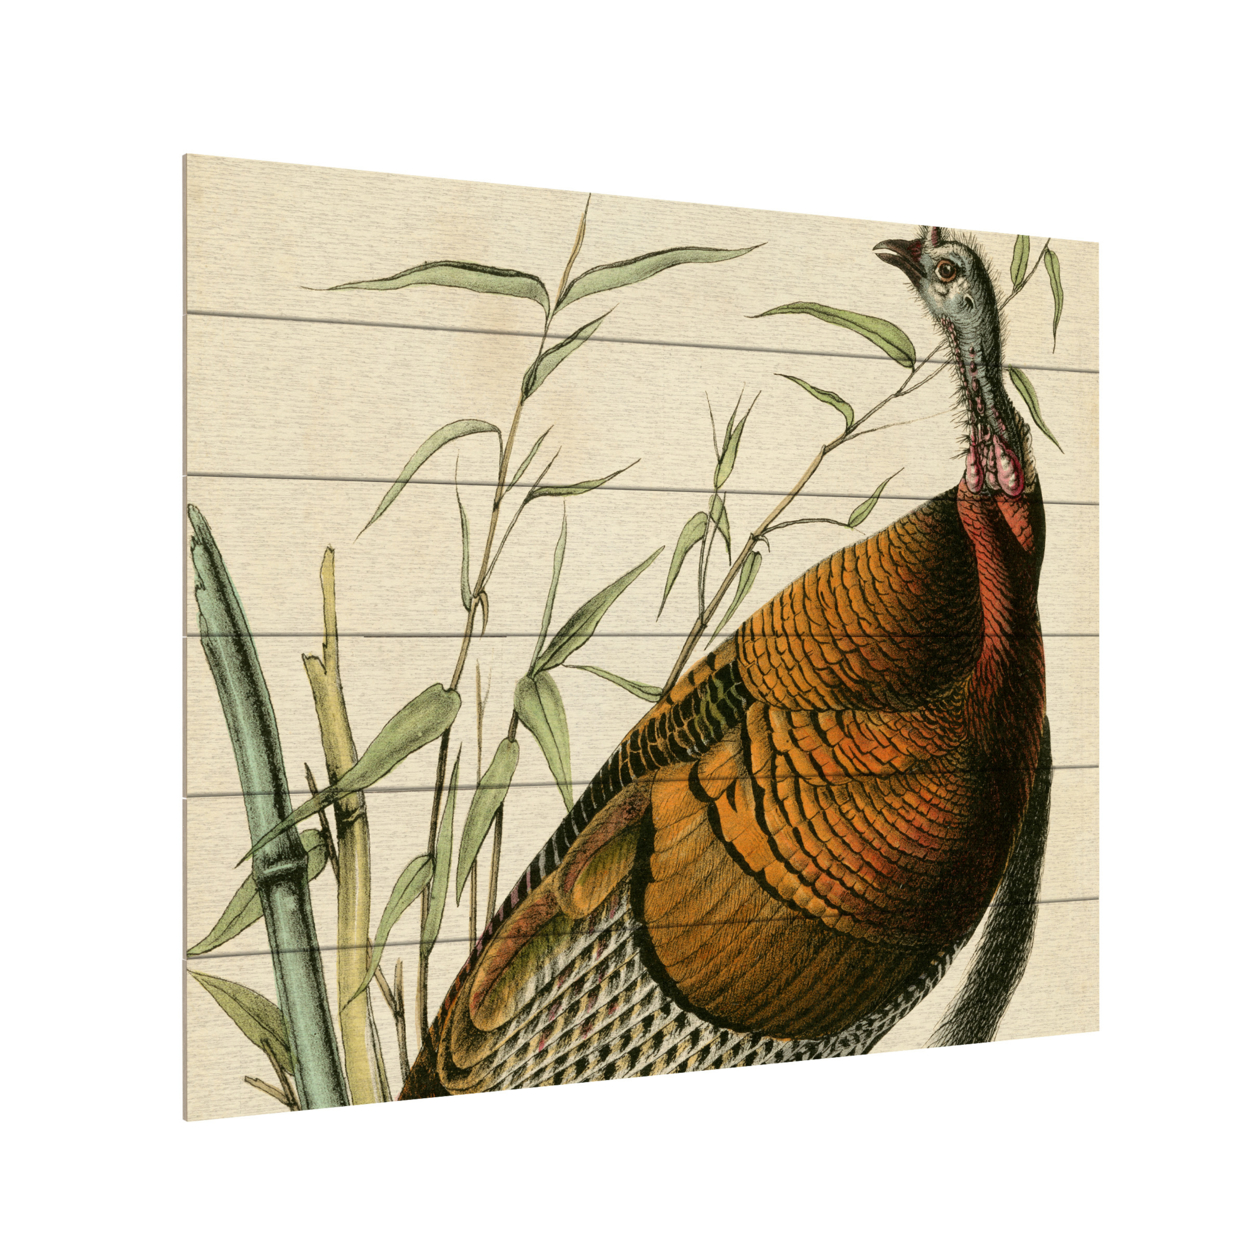 Wooden Slat Art 18 X 22 Inches Titled Audubon Wild Turkey Ready To Hang Home Decor Picture